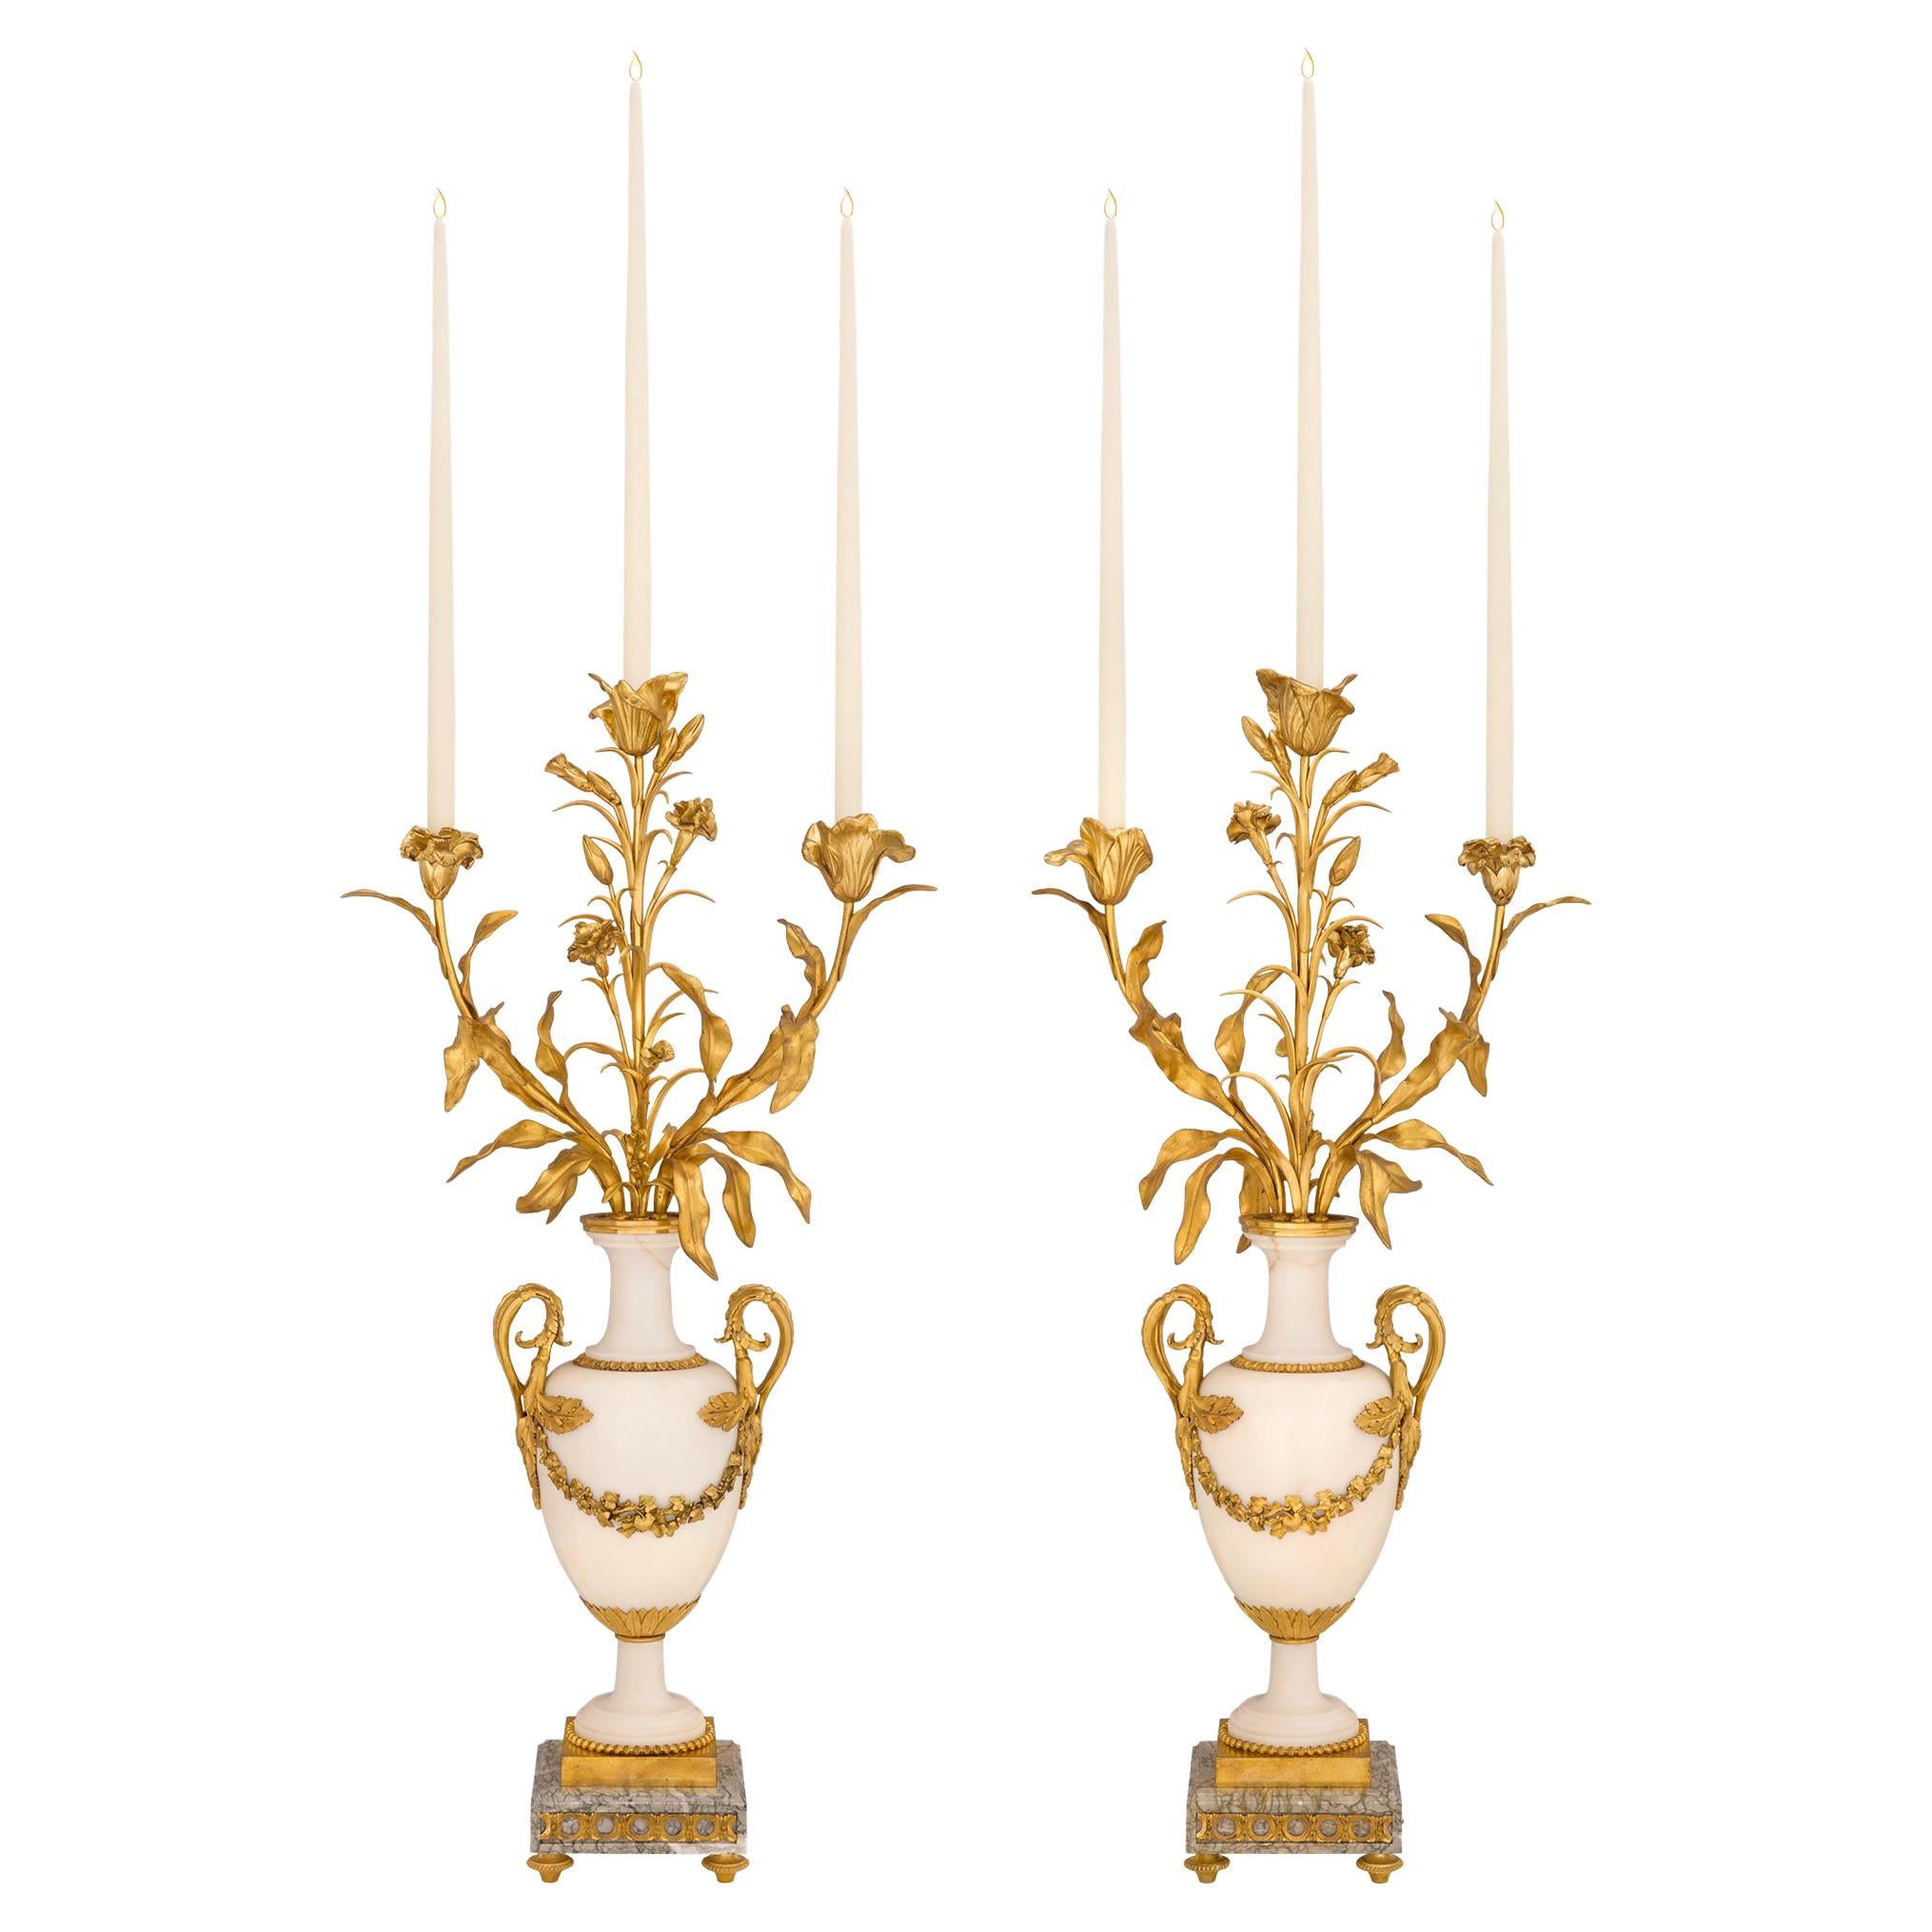 Pair of French 19th Century Louis XVI Style Marble and Ormolu Candelabras For Sale